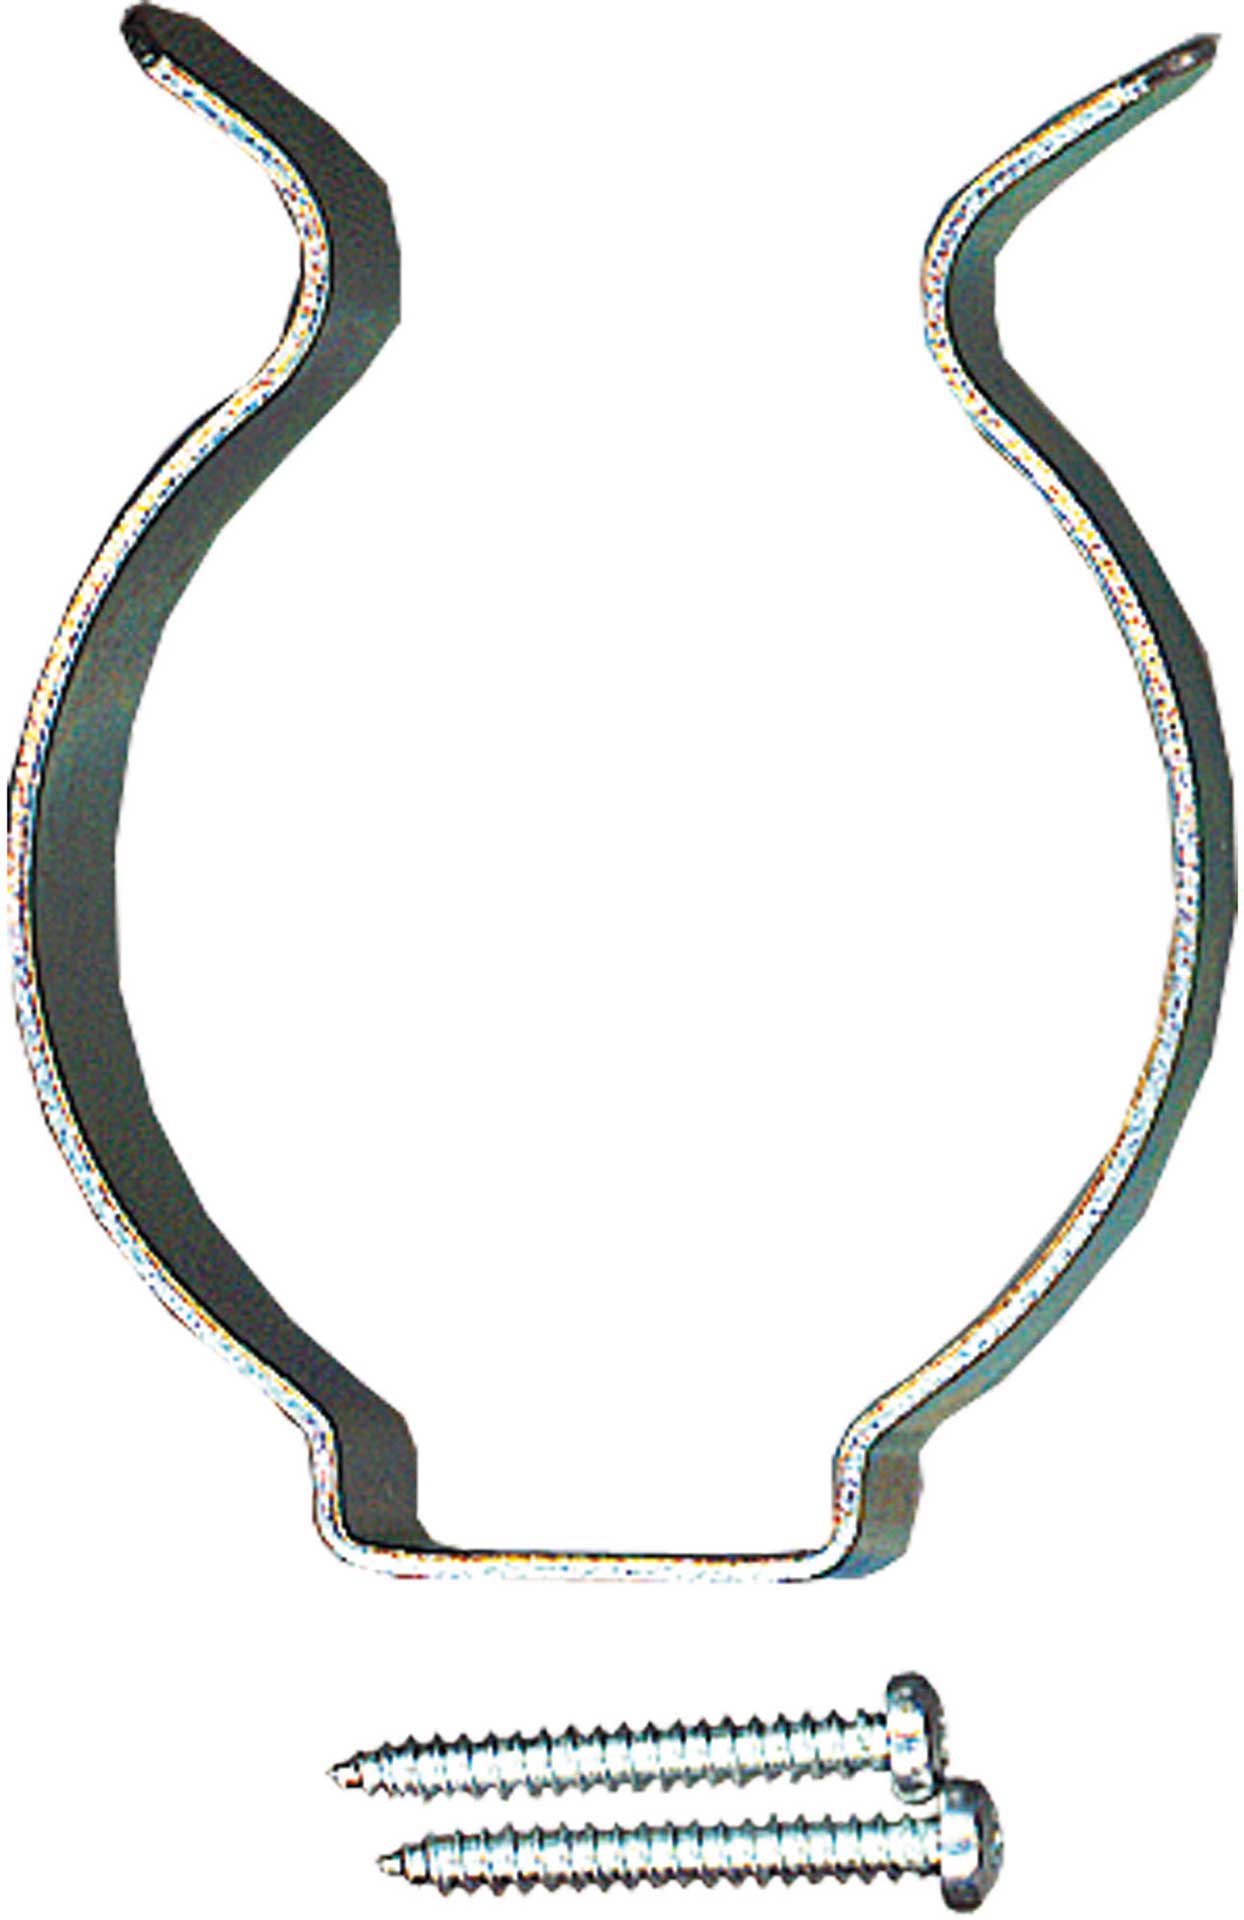 KDH SPECIAL CLAMP 50-68MM